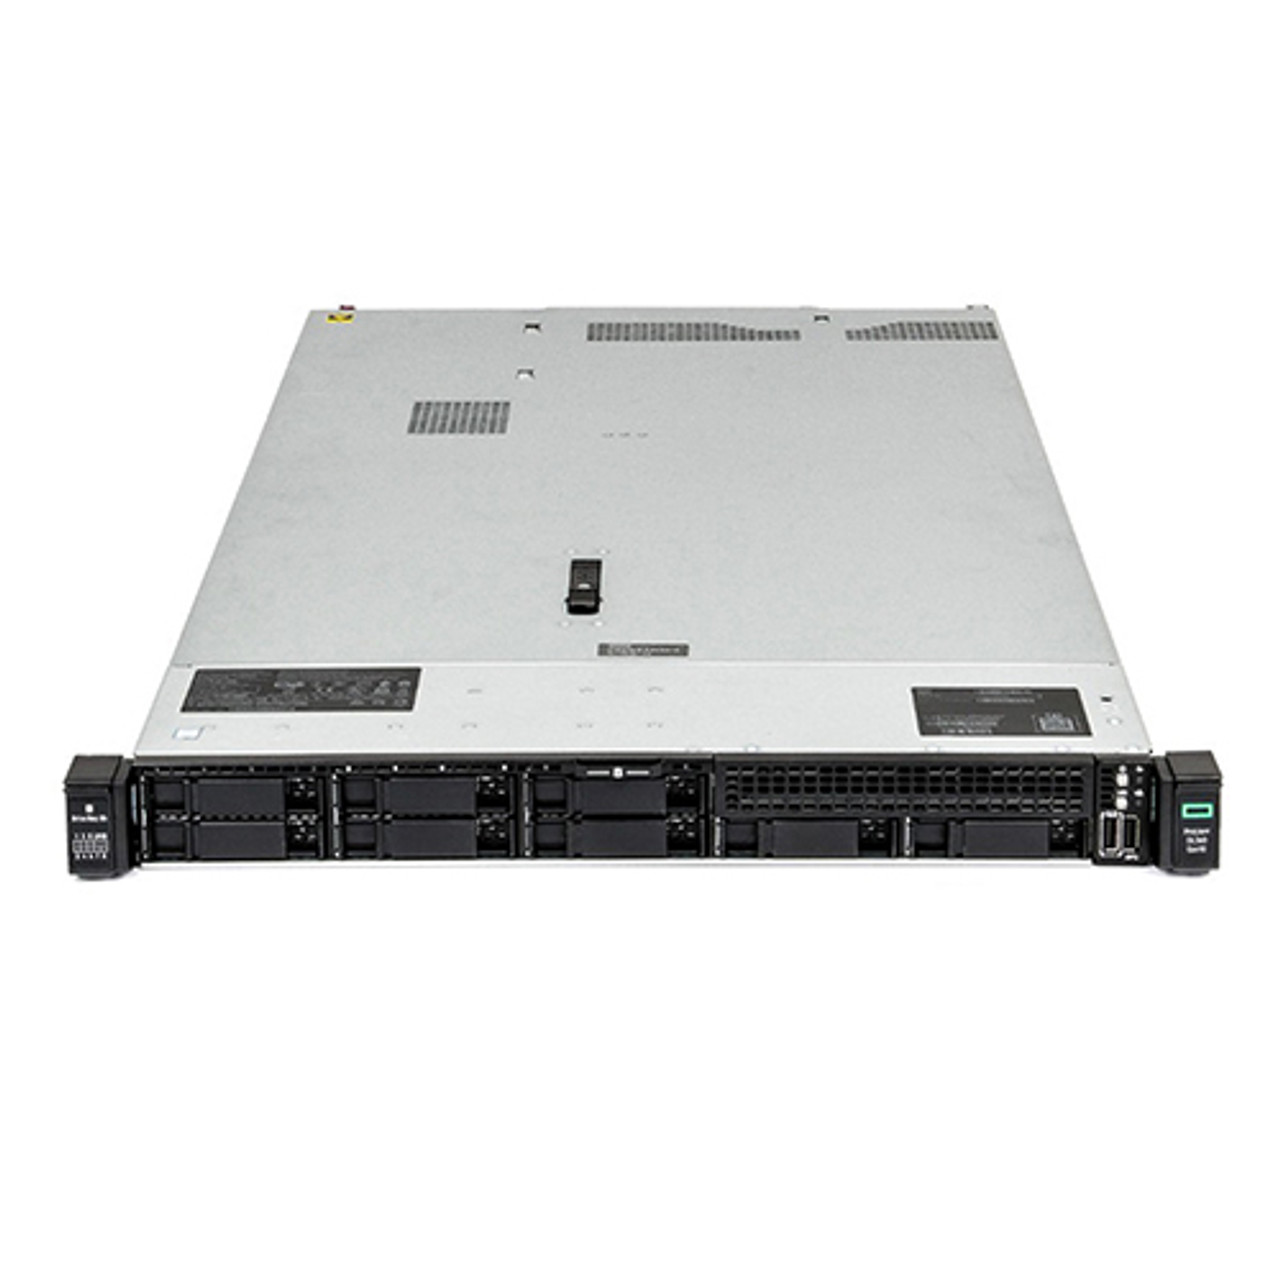 HPE Proliant DL360 Gen10 Server | 2x Gold 6128 3.4Ghz 12 Cores | 192GB |  E208i | 8x HDD Trays - SaveMyServer